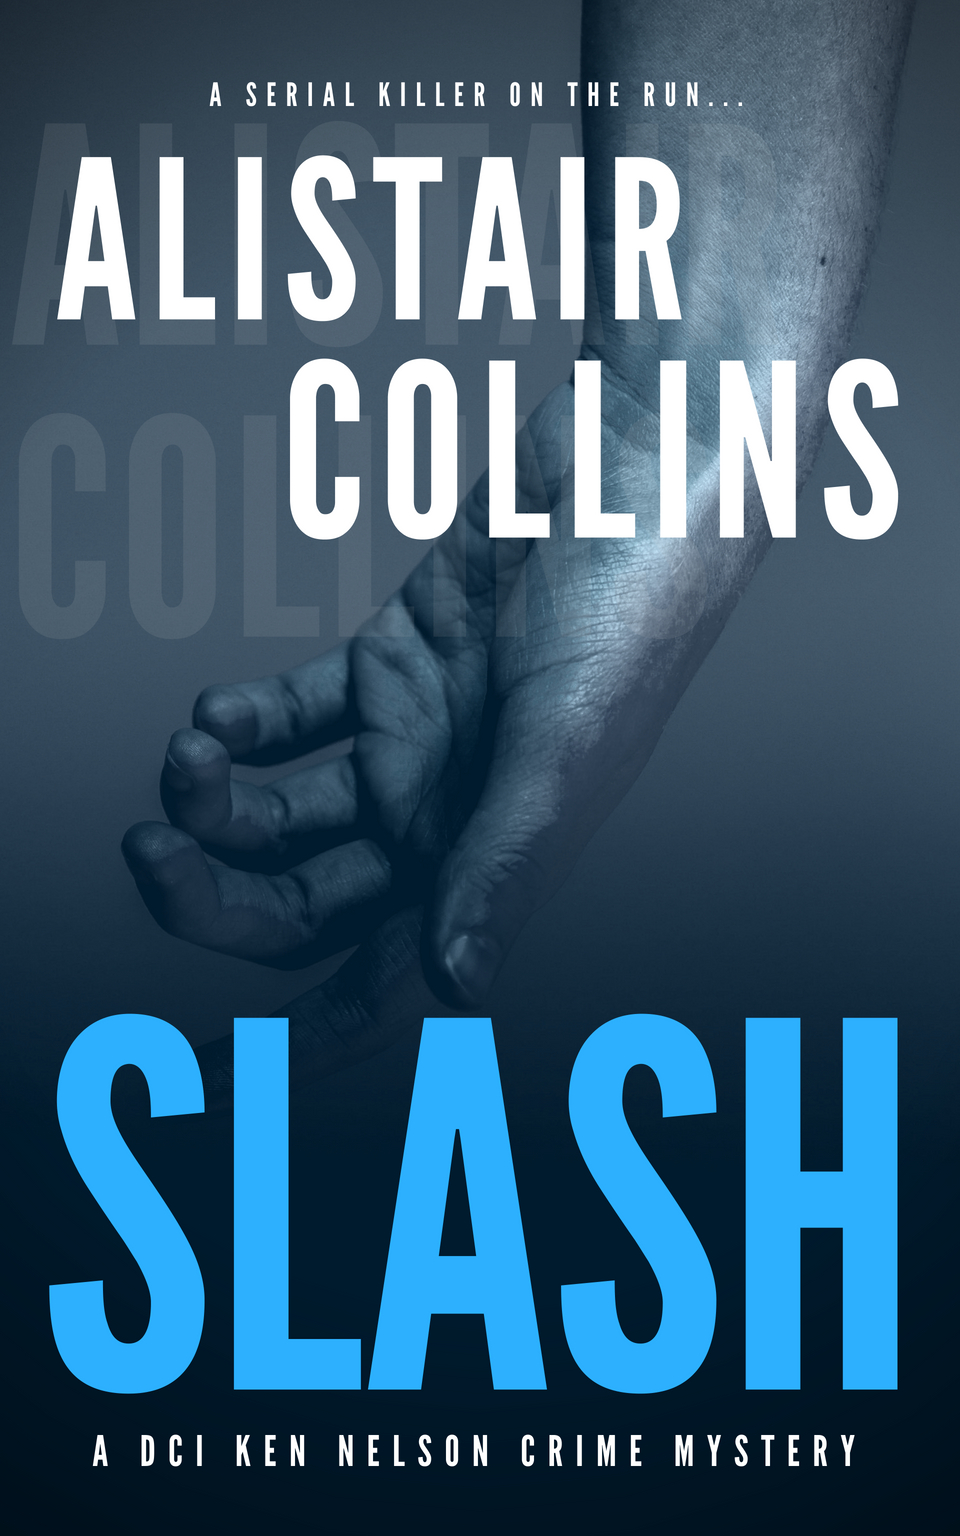 FREE: SLASH – A DCI Ken Nelson Crime Mystery: A Serial Killer Crime Thriller With A Shocking Twist by Alistair Collins